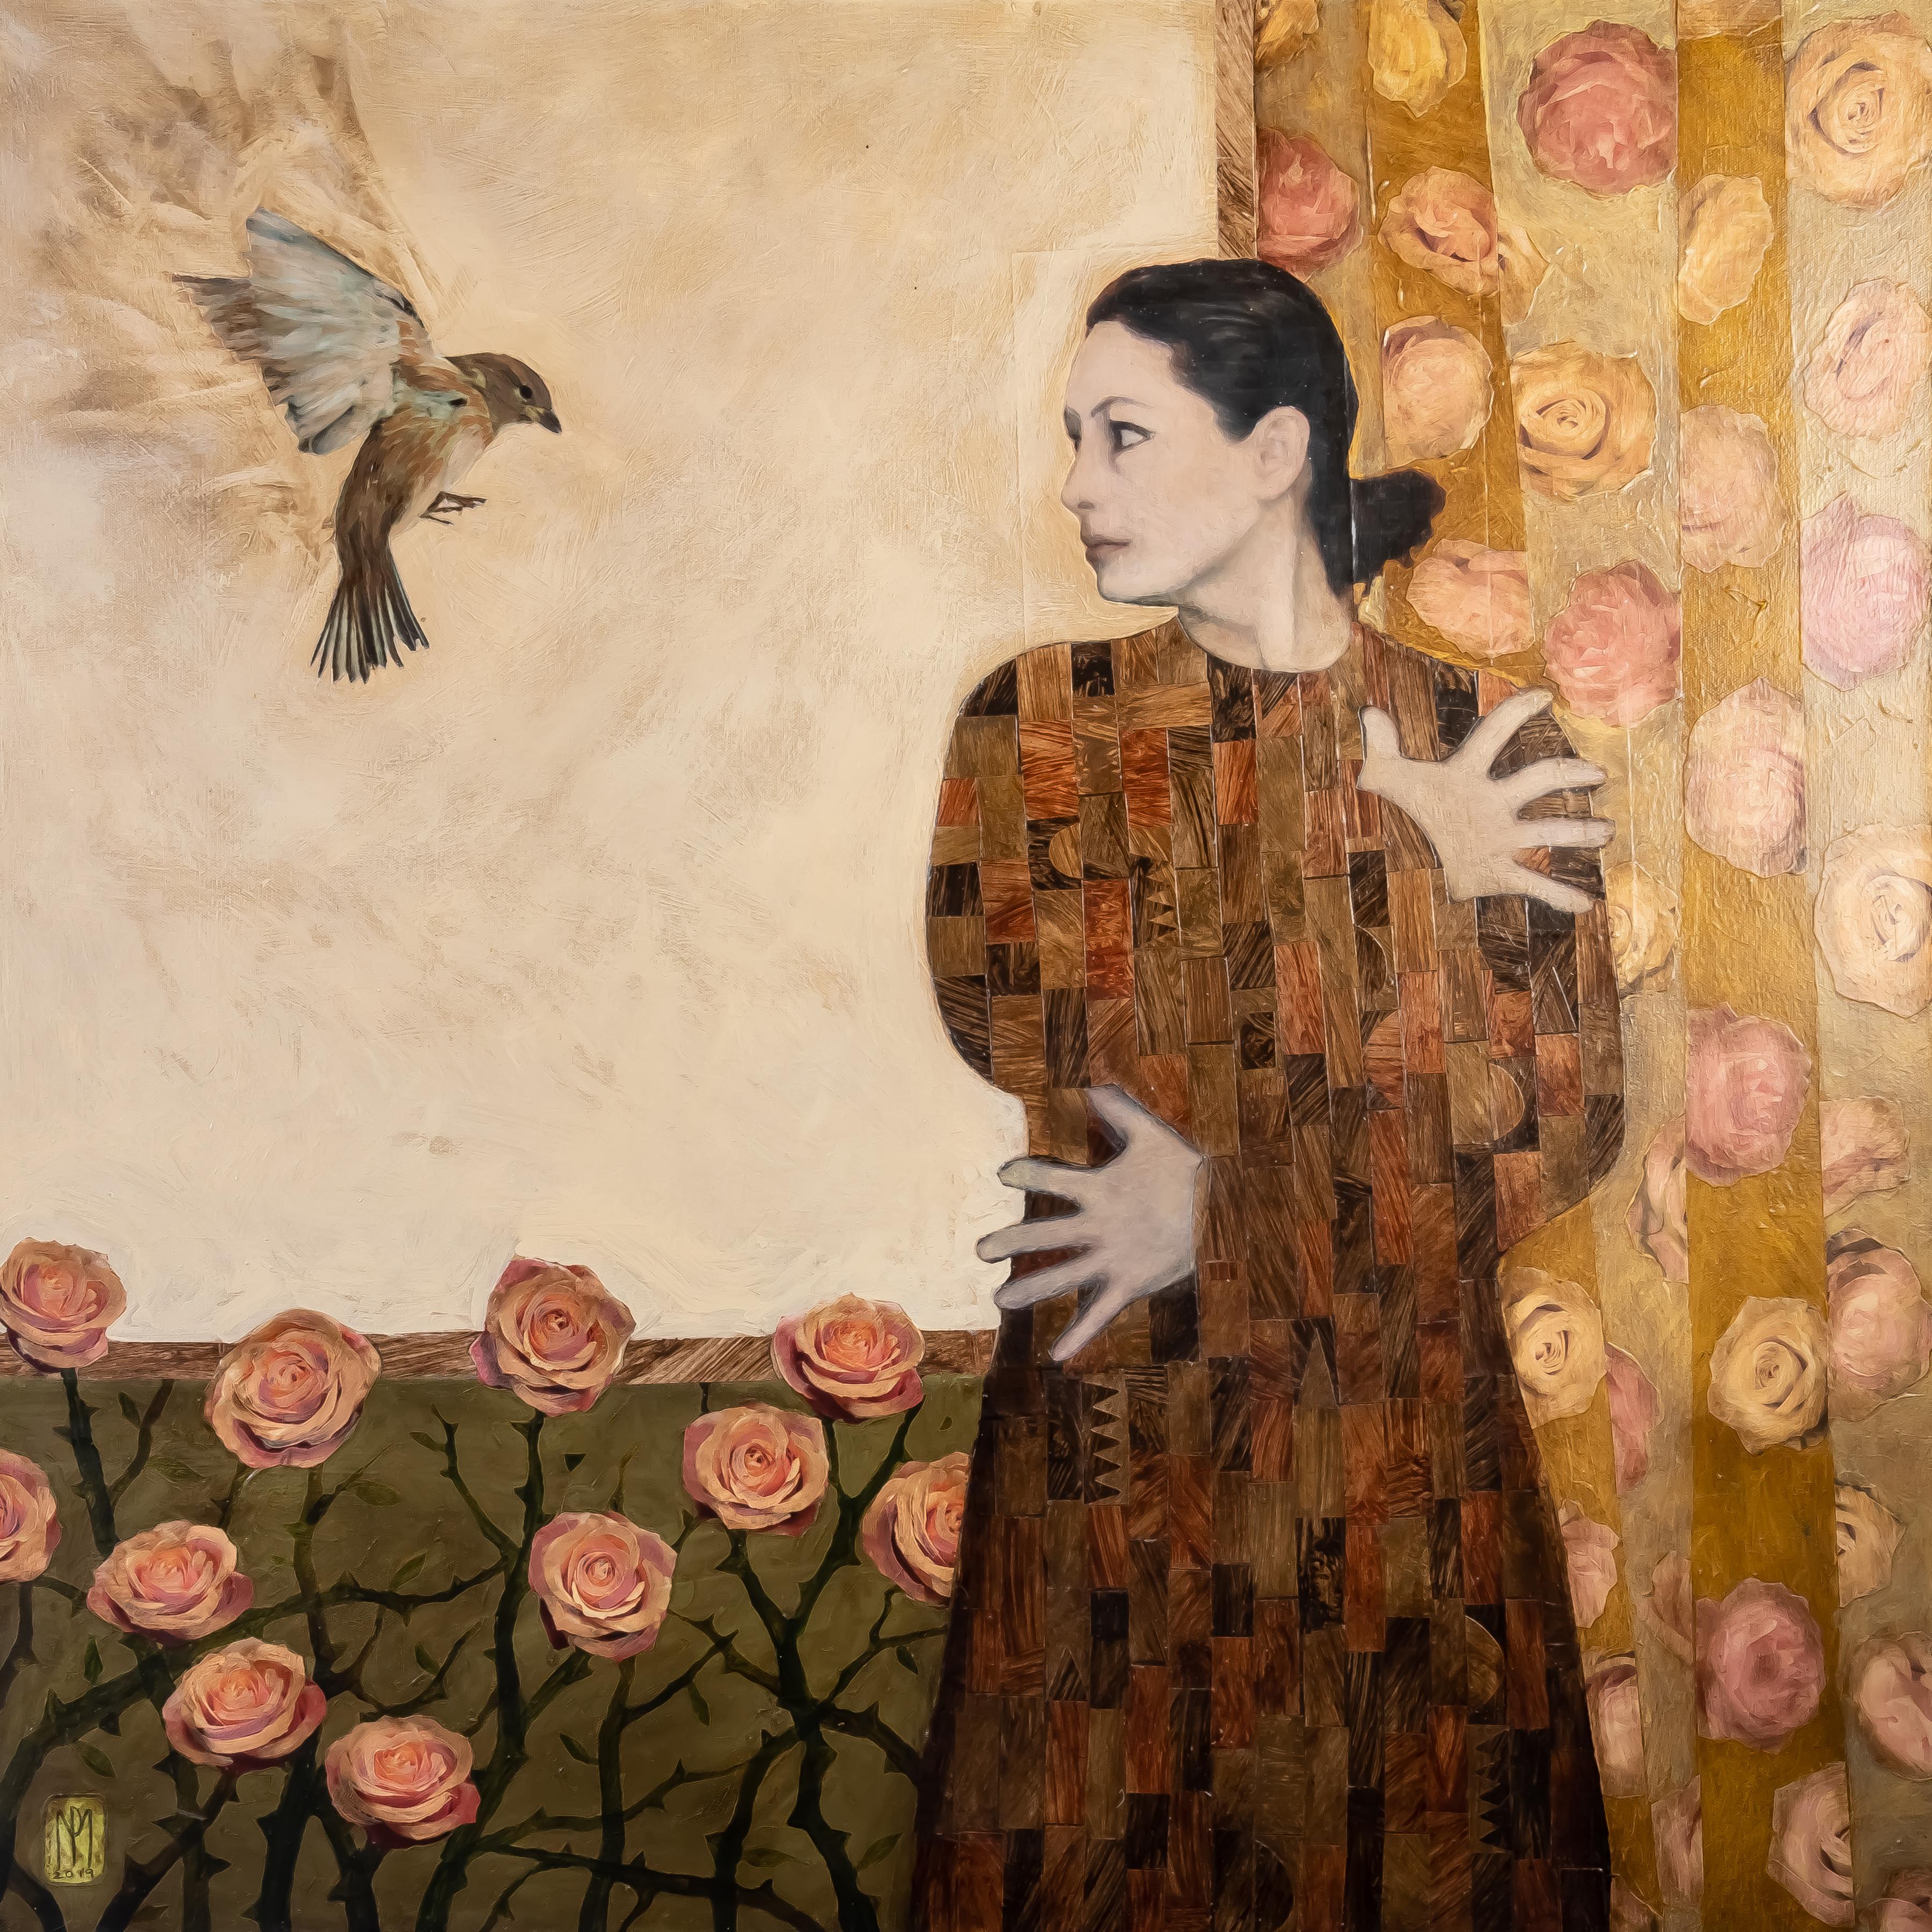 "Emily Suite #3" is one from a series of dramatic portraits of the artist's daughter, featured in the recent solo exhibition, "Spaces In Between." This 36 x 36 x 1.5 inch mixed media on canvas work features a woman in a protective stance as a bird